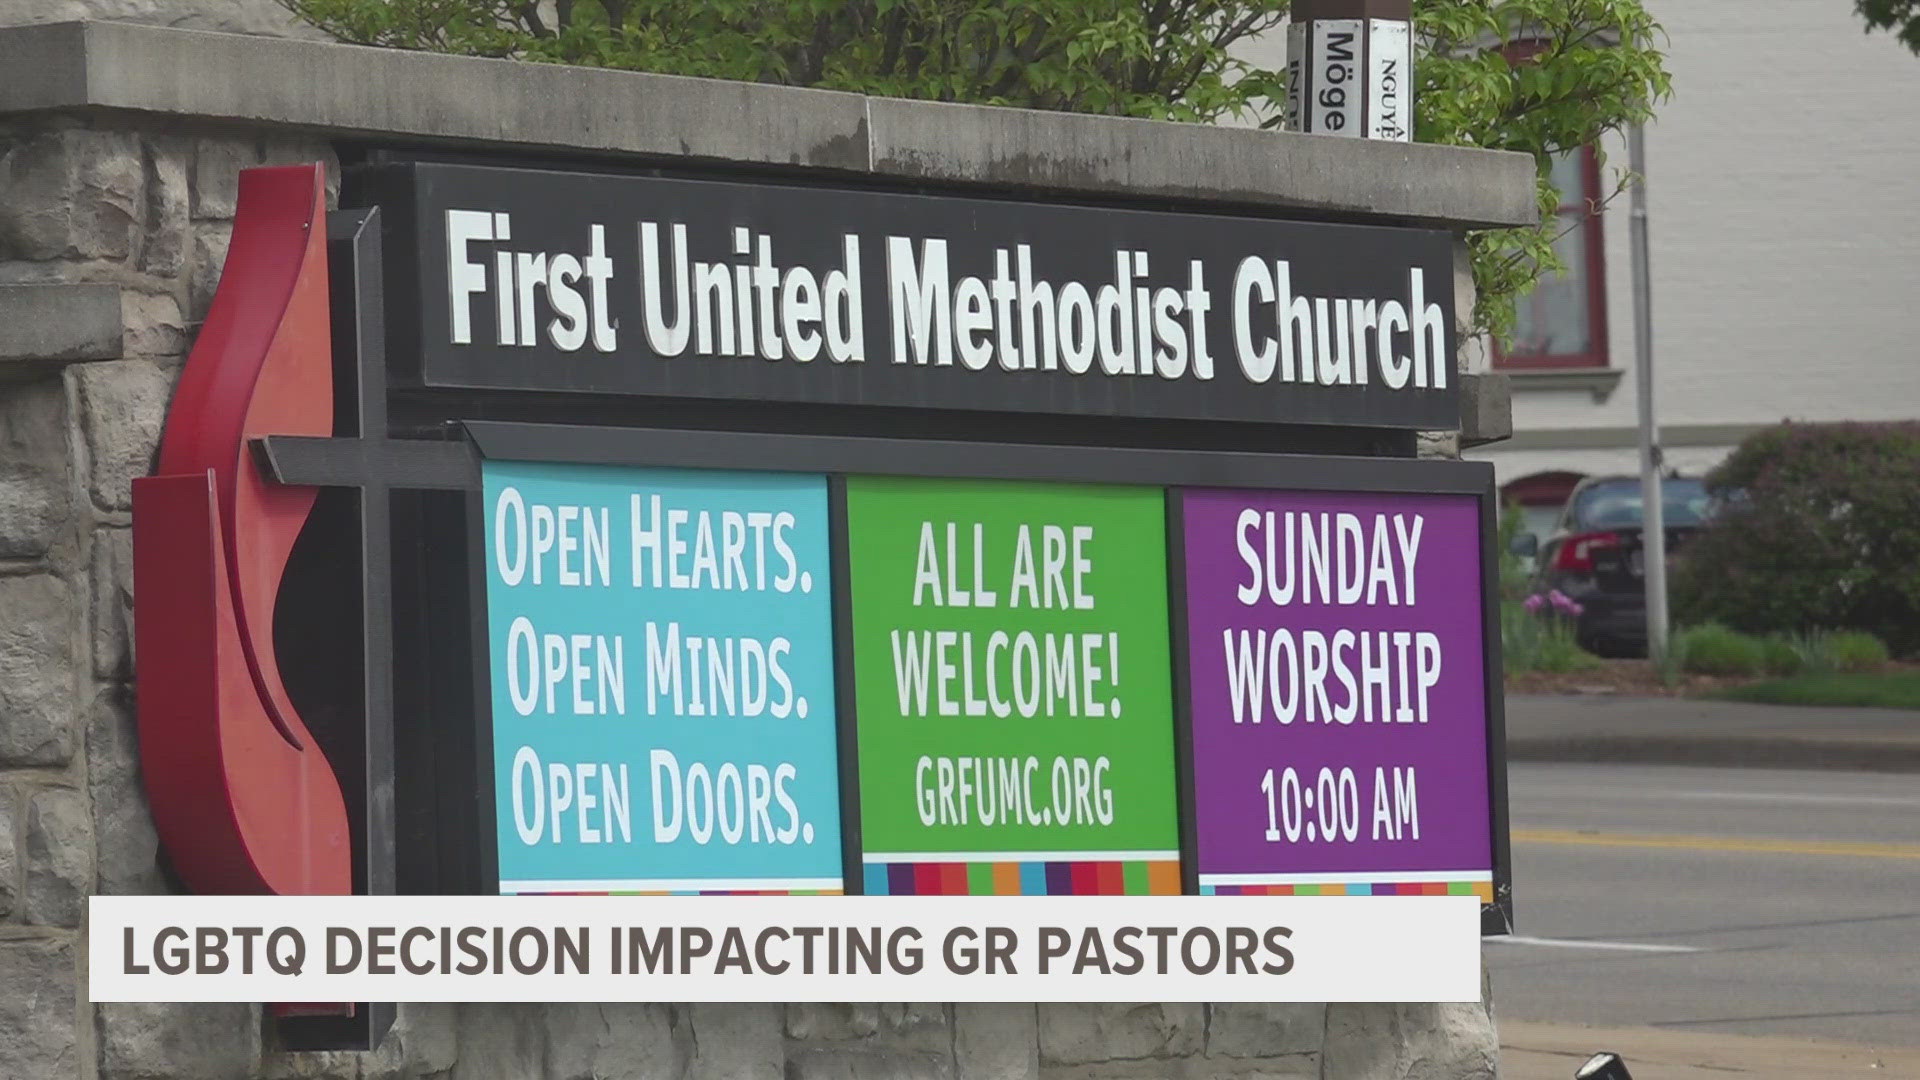 We spoke to a local pastor about the recent decision.